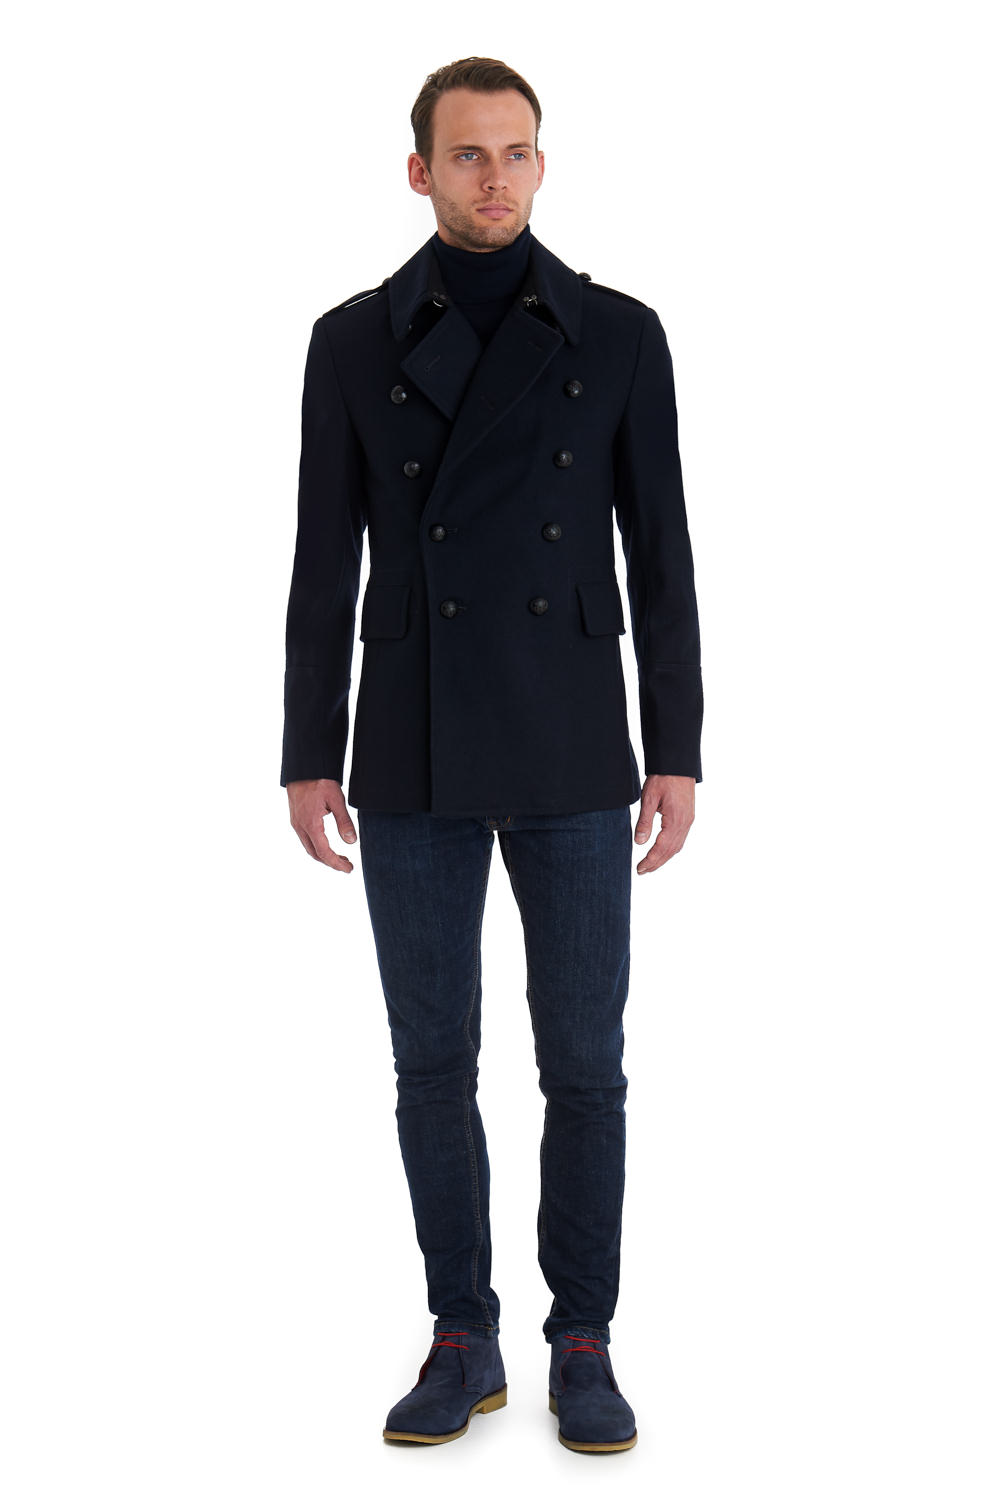 Moss 1851 Tailored Fit Navy Pea Coat